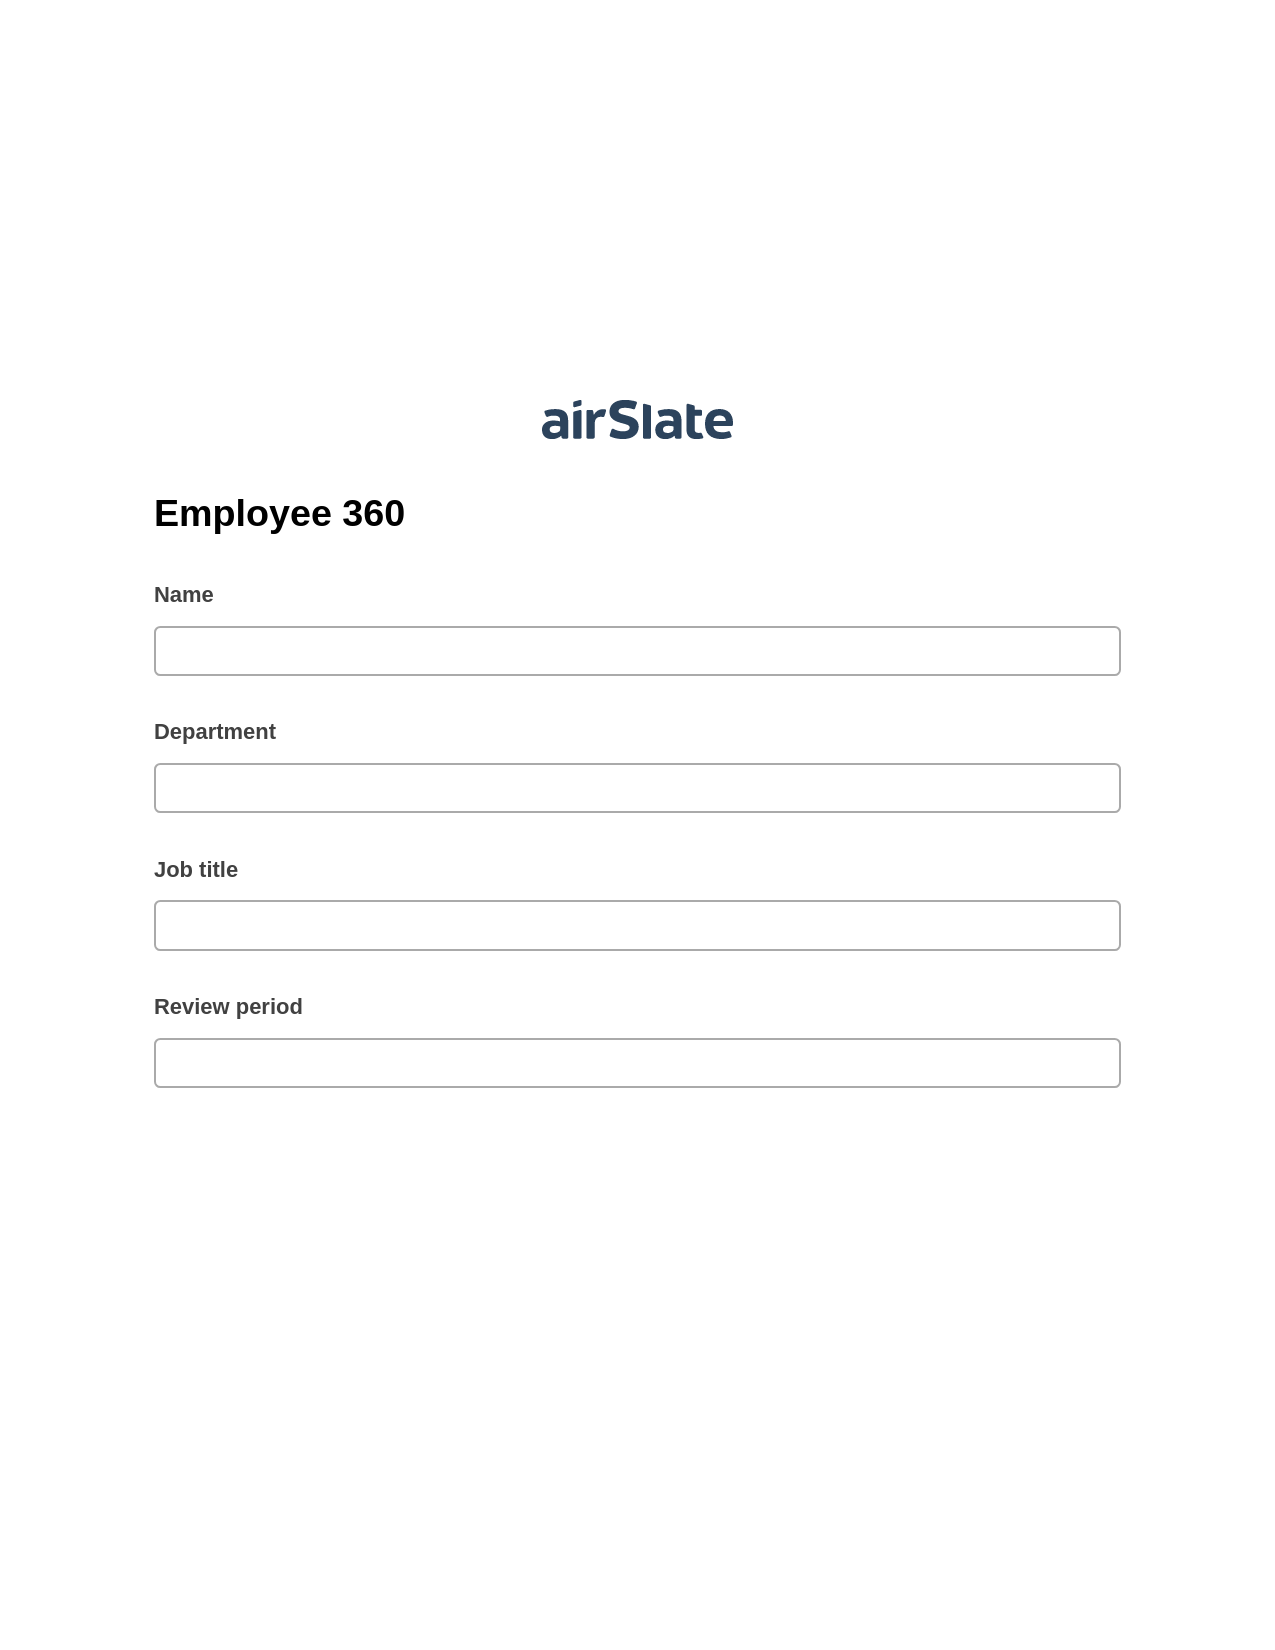 Multirole Employee 360 Pre-fill from Salesforce Records with SOQL Bot, Update MS Dynamics 365 Record Bot, Export to Salesforce Record Bot